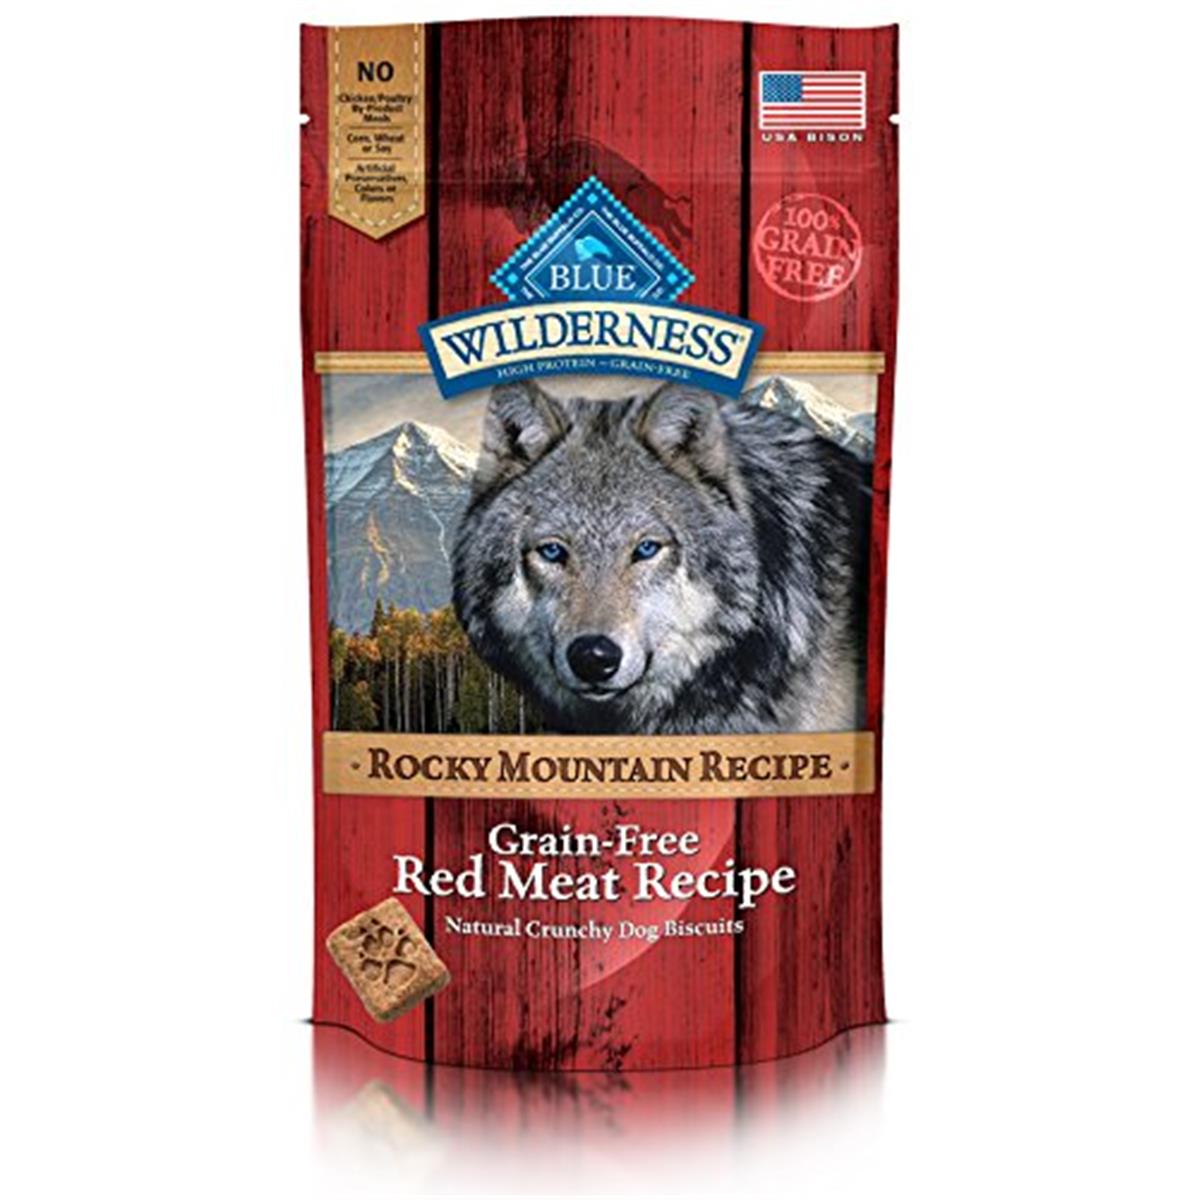 Bb11659 Wilderness Rocky Mountain Recipe Trail Treats Red Meat Dog Food Biscuits, 8 Oz